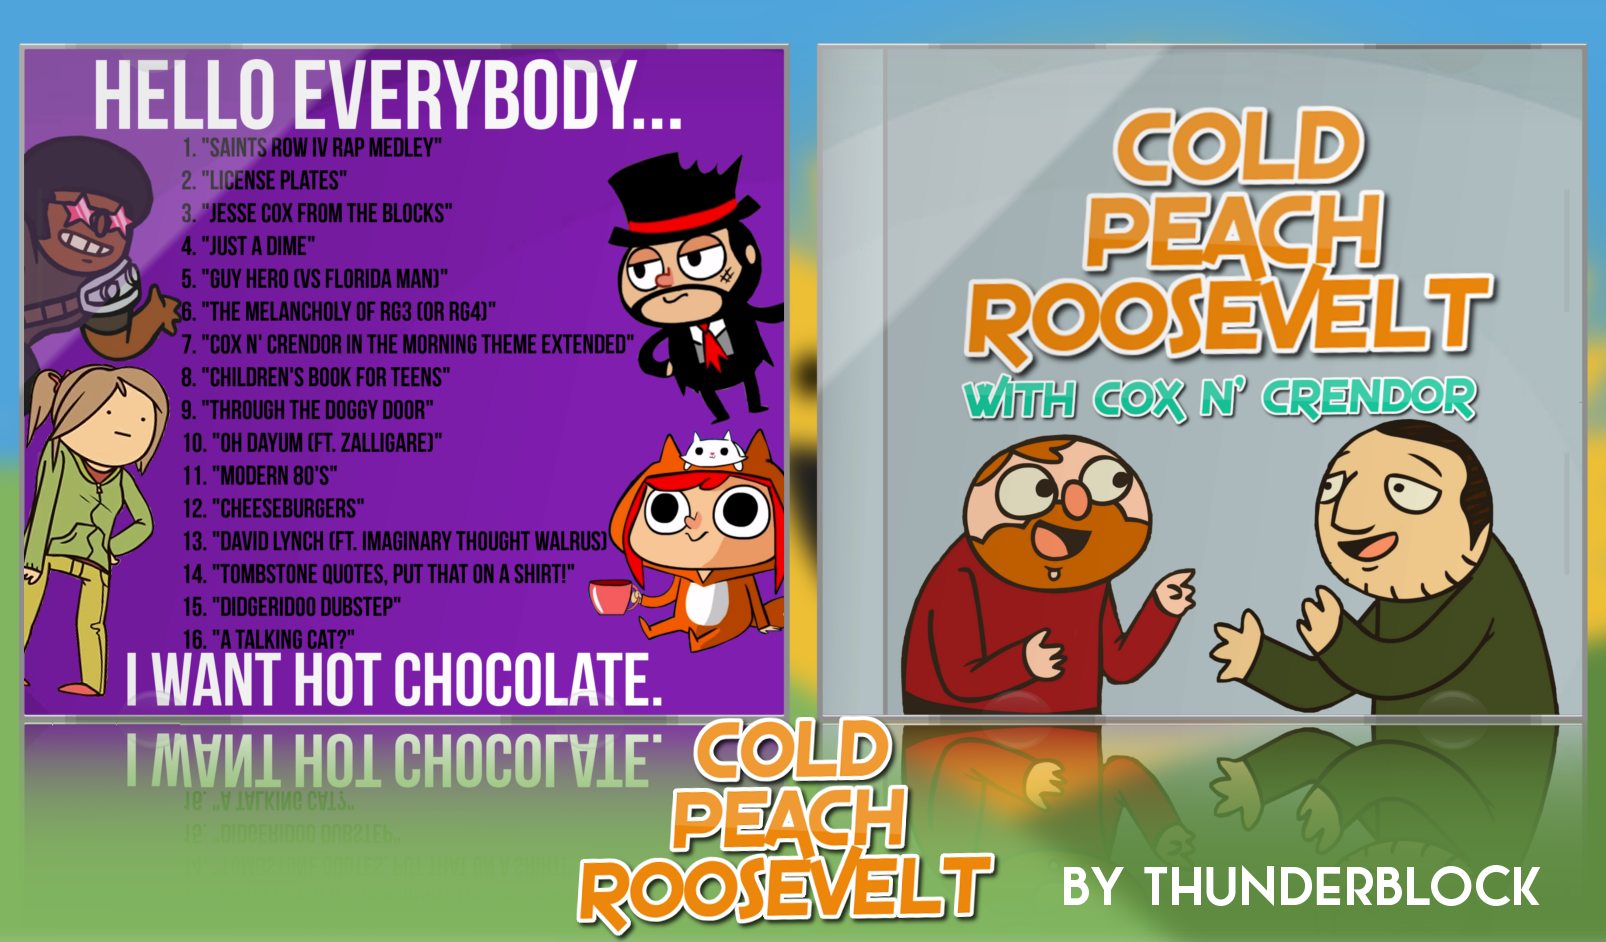 Cold Peach Roosevelt with Cox n' Crendor box cover